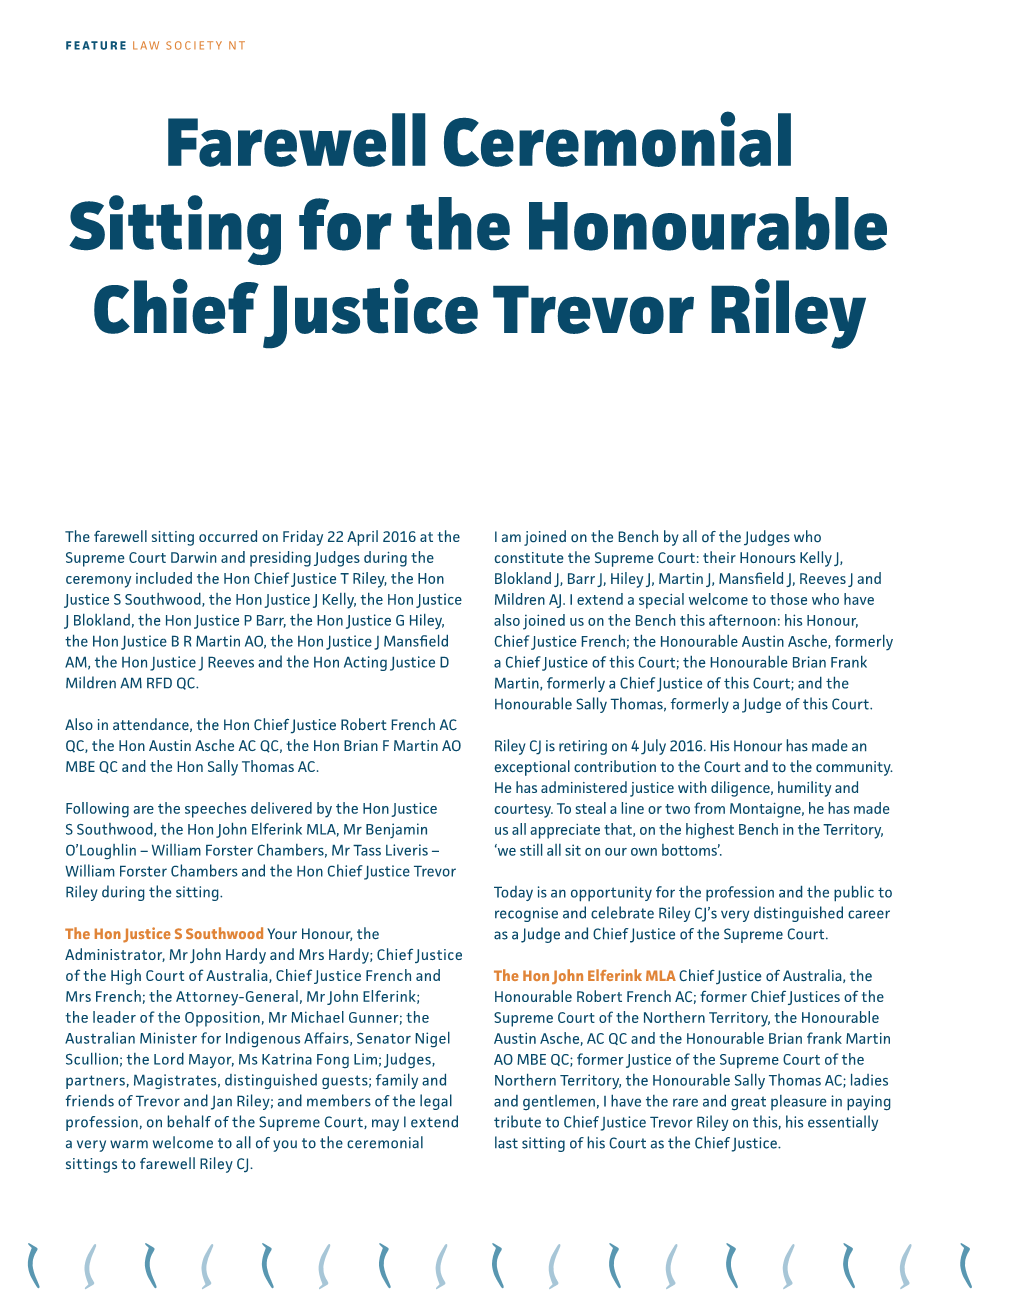 Farewell Ceremonial Sitting for the Honourable Chief Justice Trevor Riley